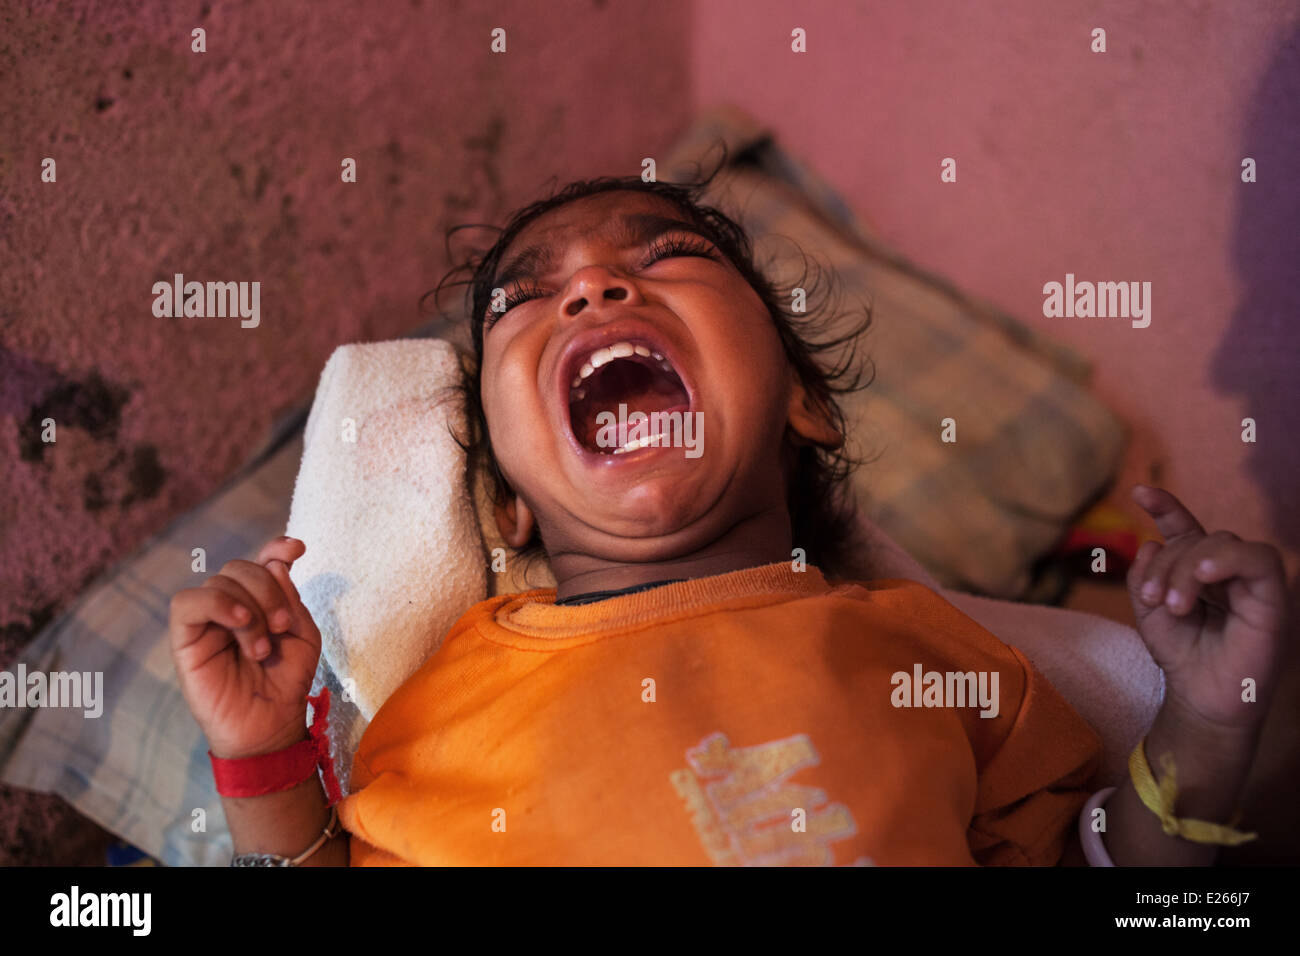 A crying young child baby at home in a slum in Mumbai, India. Stock Photo